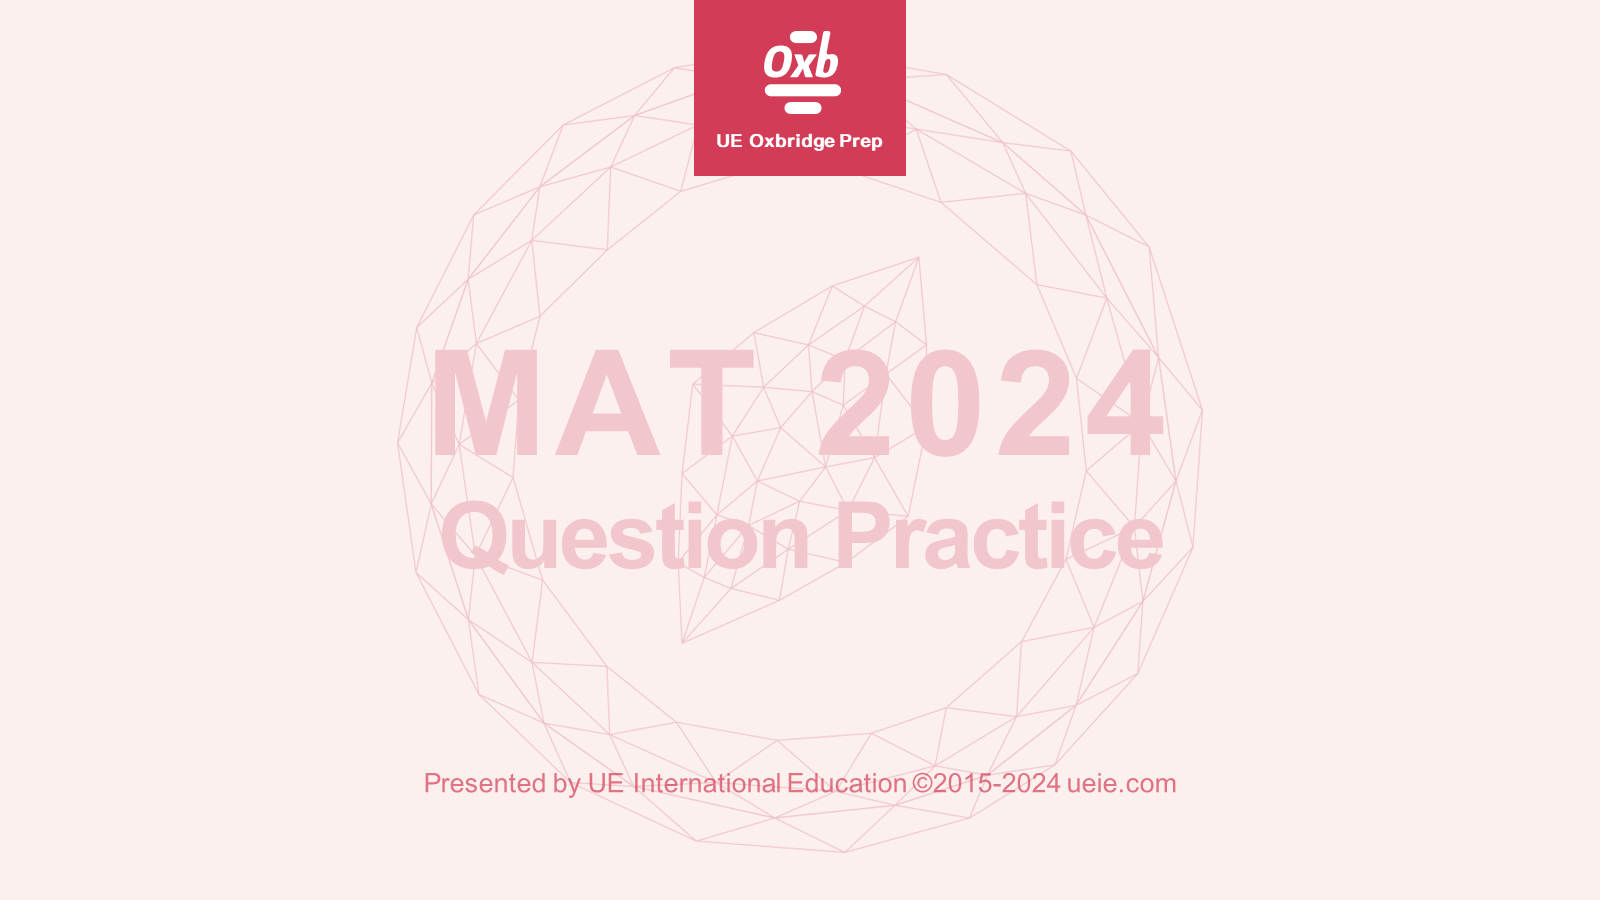 Oxford MAT 2024 Question Practice-Video